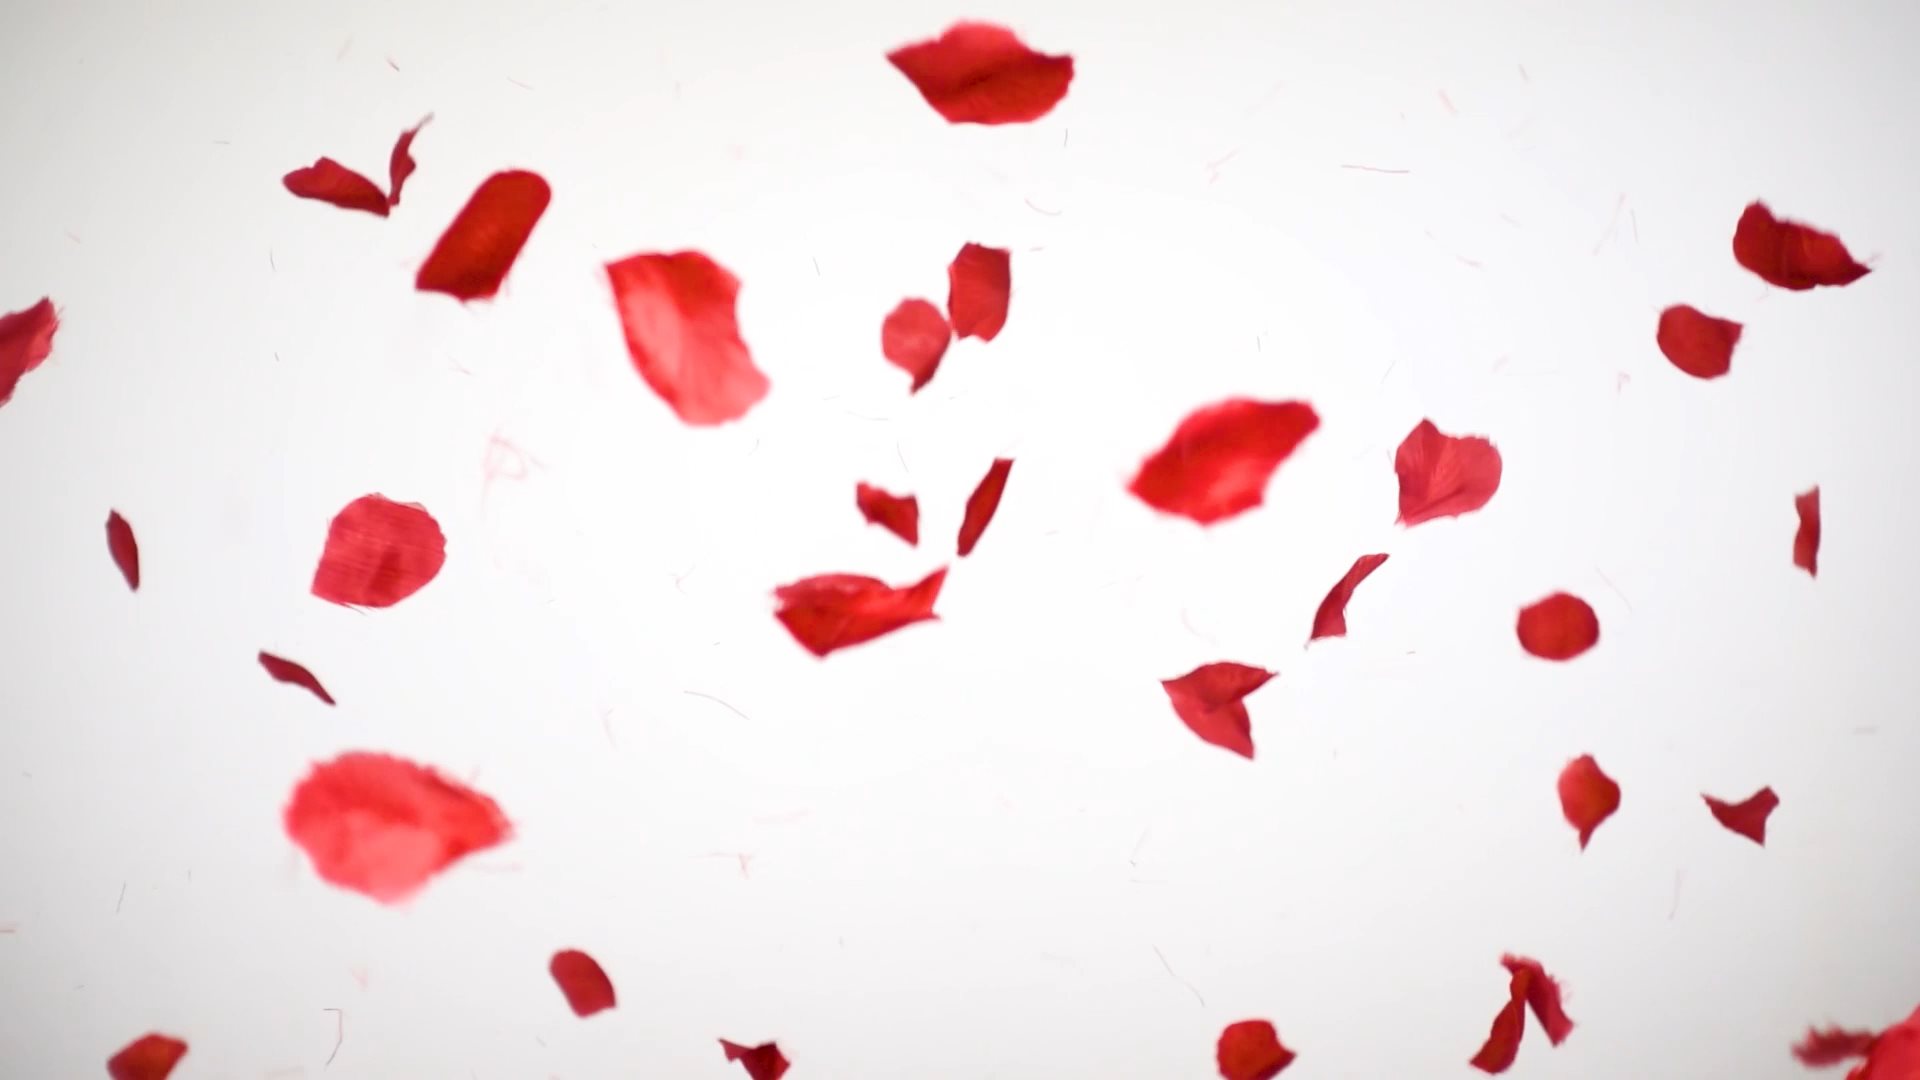 Video of red rose petals being thrown up and flying through the air